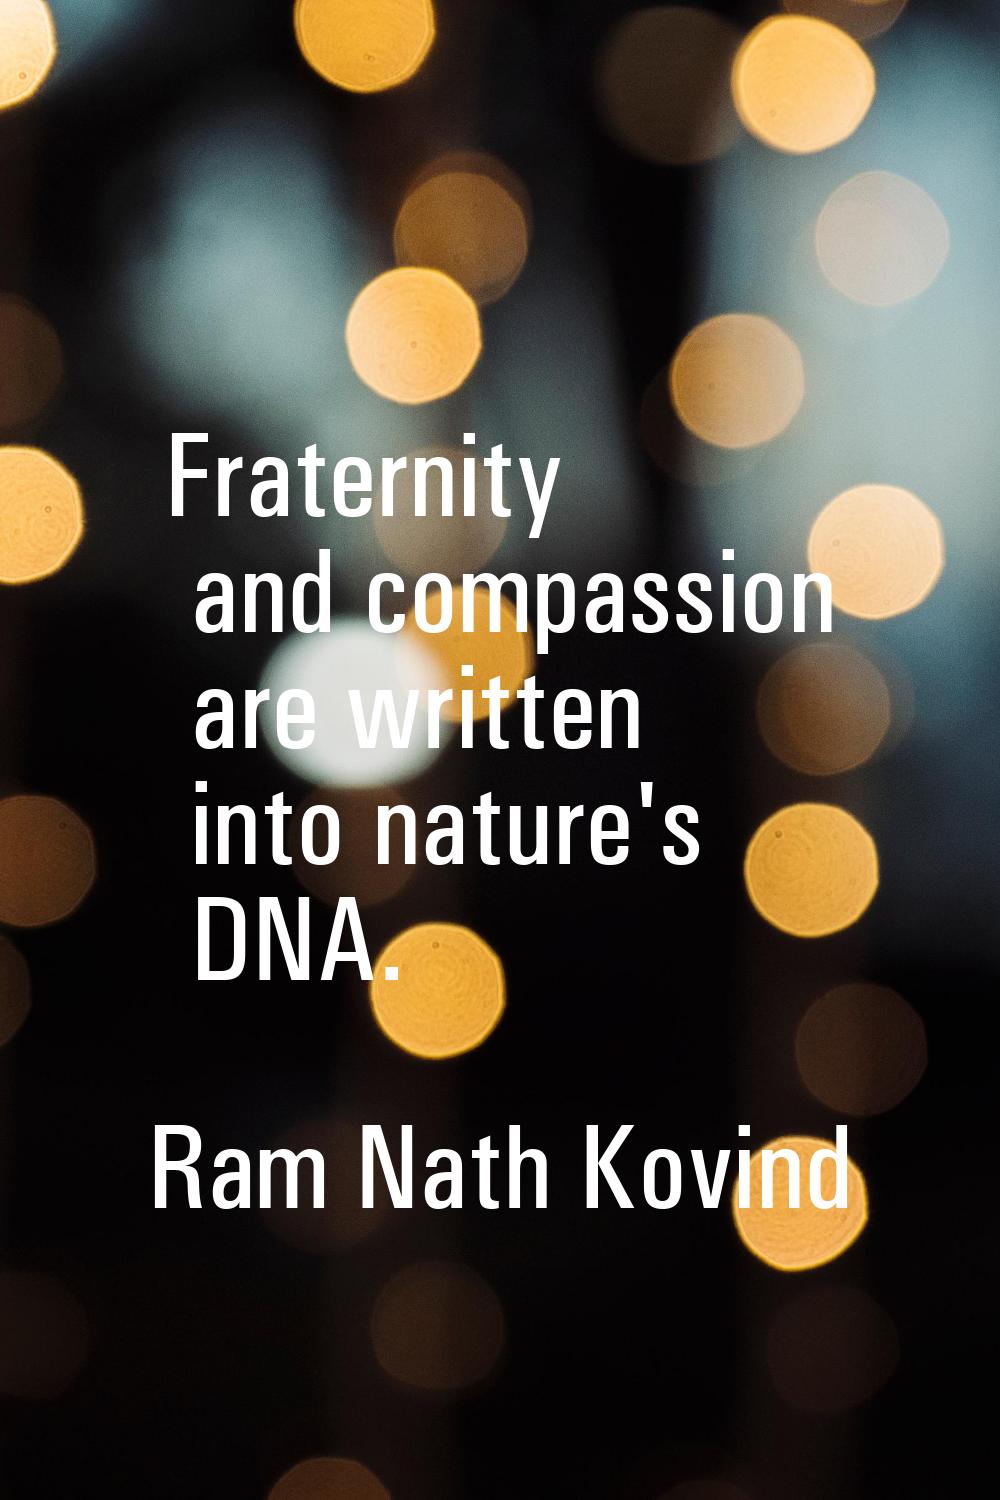 Fraternity and compassion are written into nature's DNA.